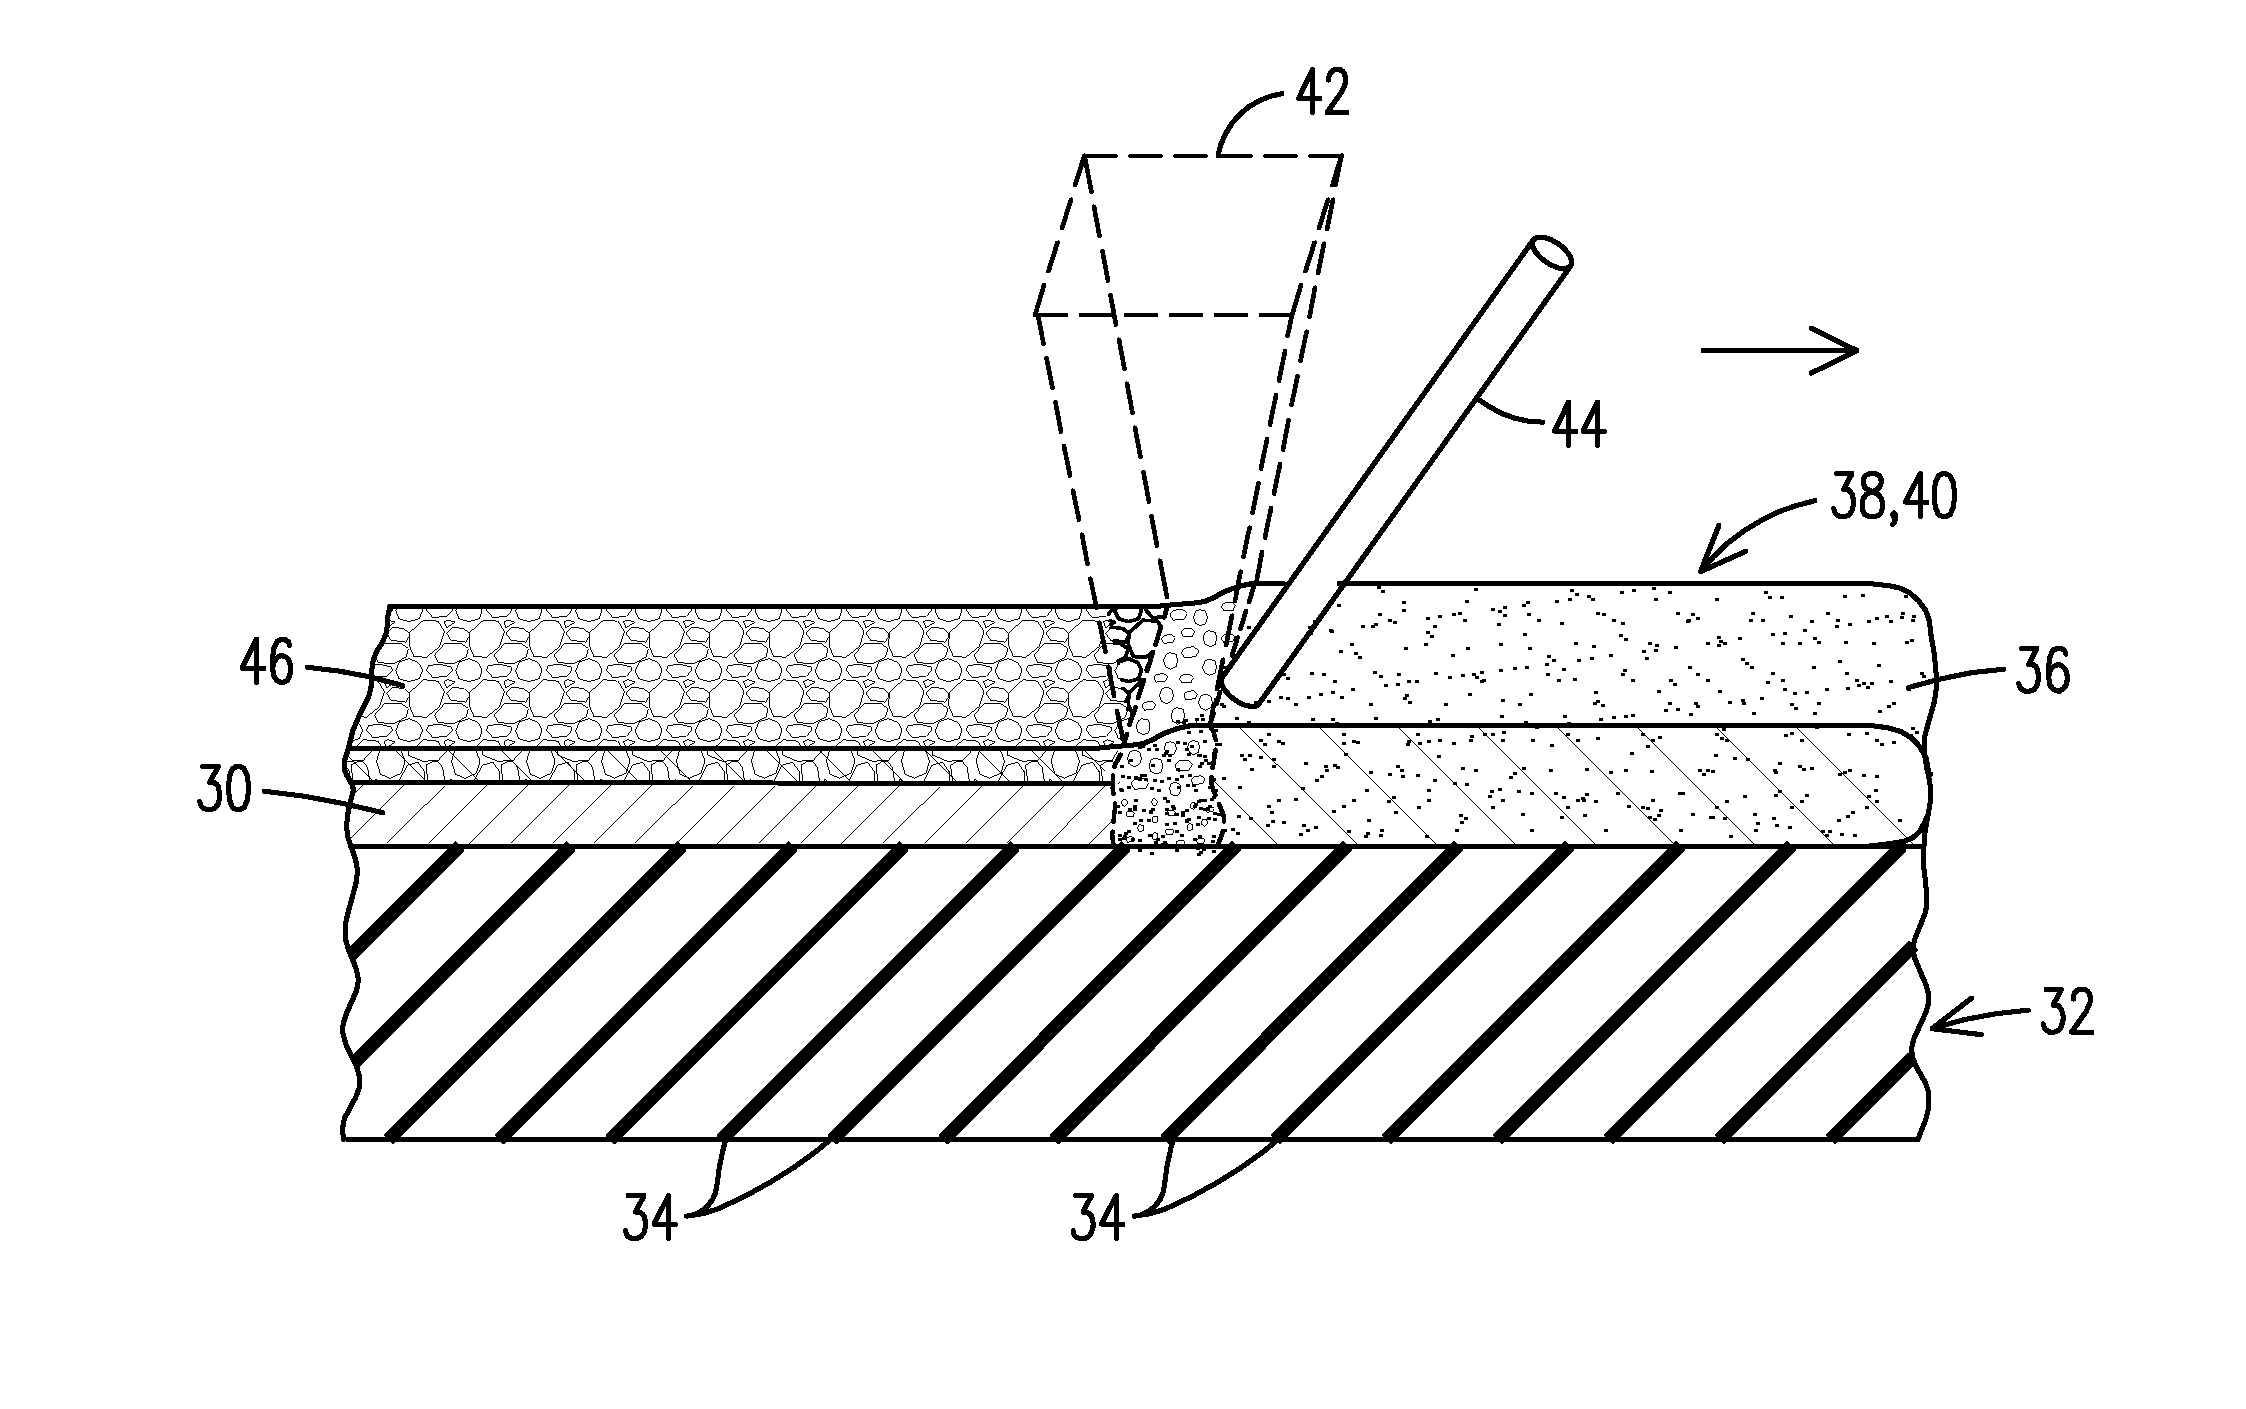 Deposition of superalloys using powdered flux and metal